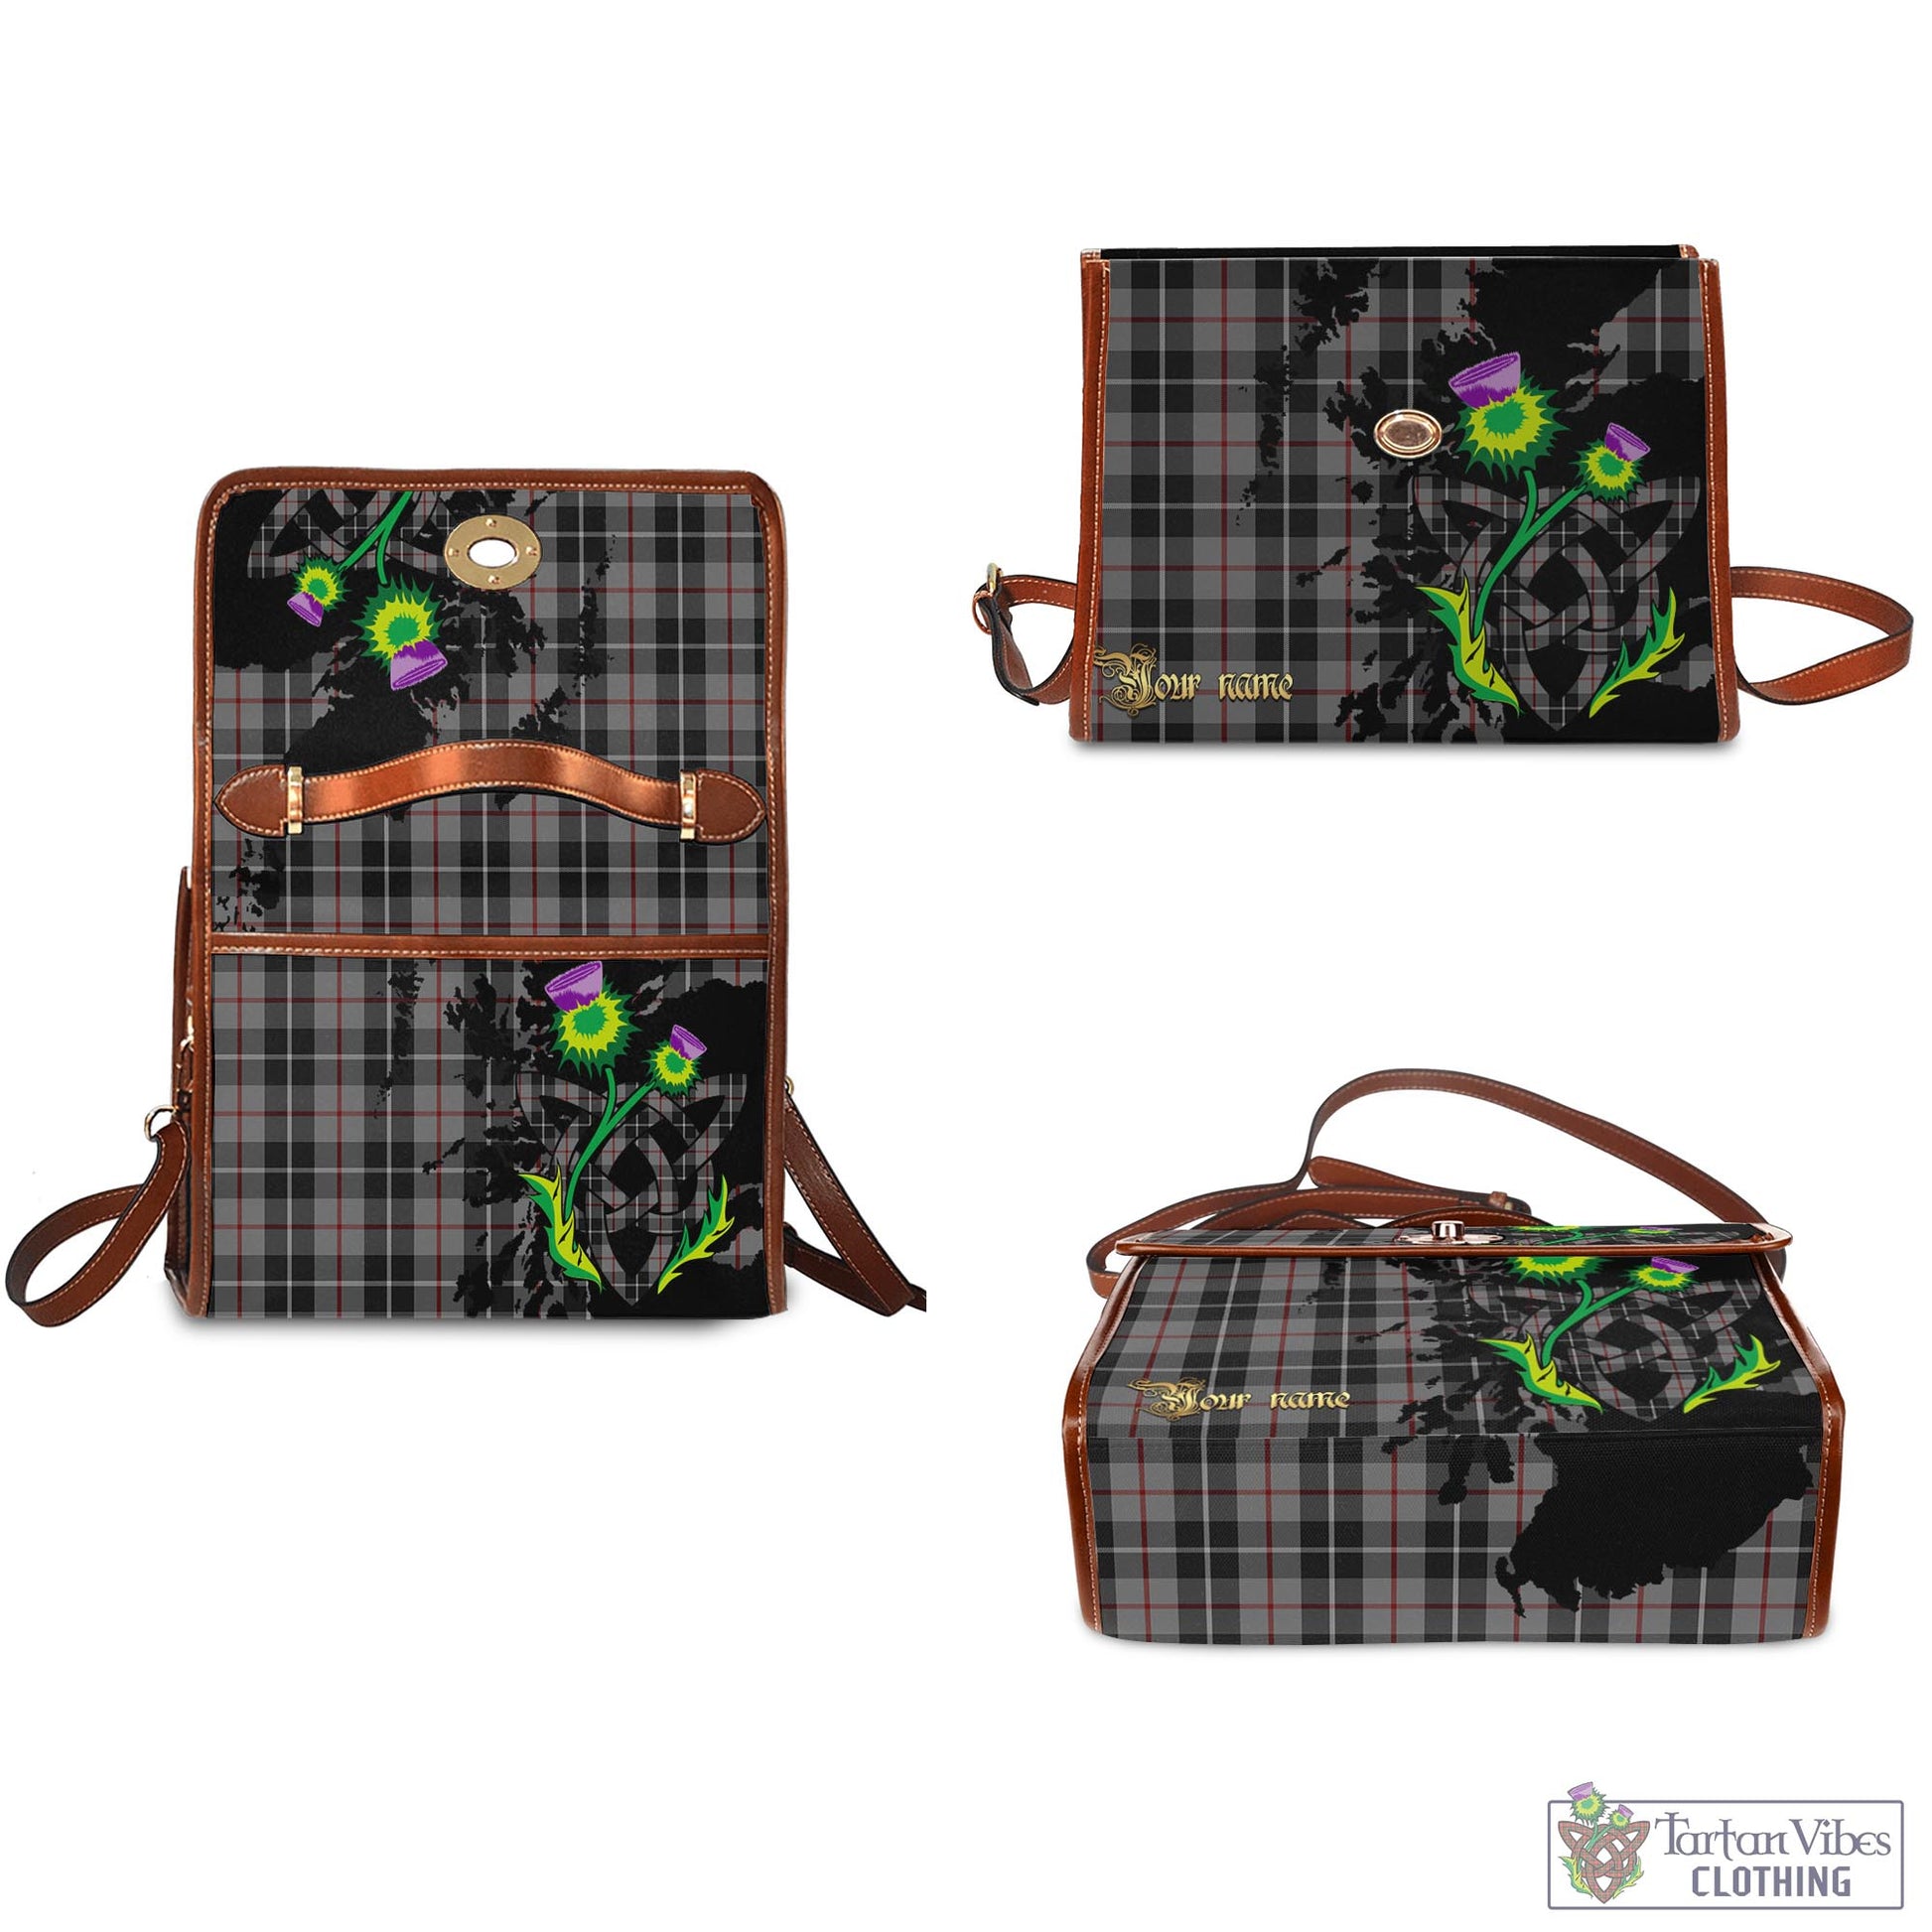 Tartan Vibes Clothing Thompson Grey Tartan Waterproof Canvas Bag with Scotland Map and Thistle Celtic Accents